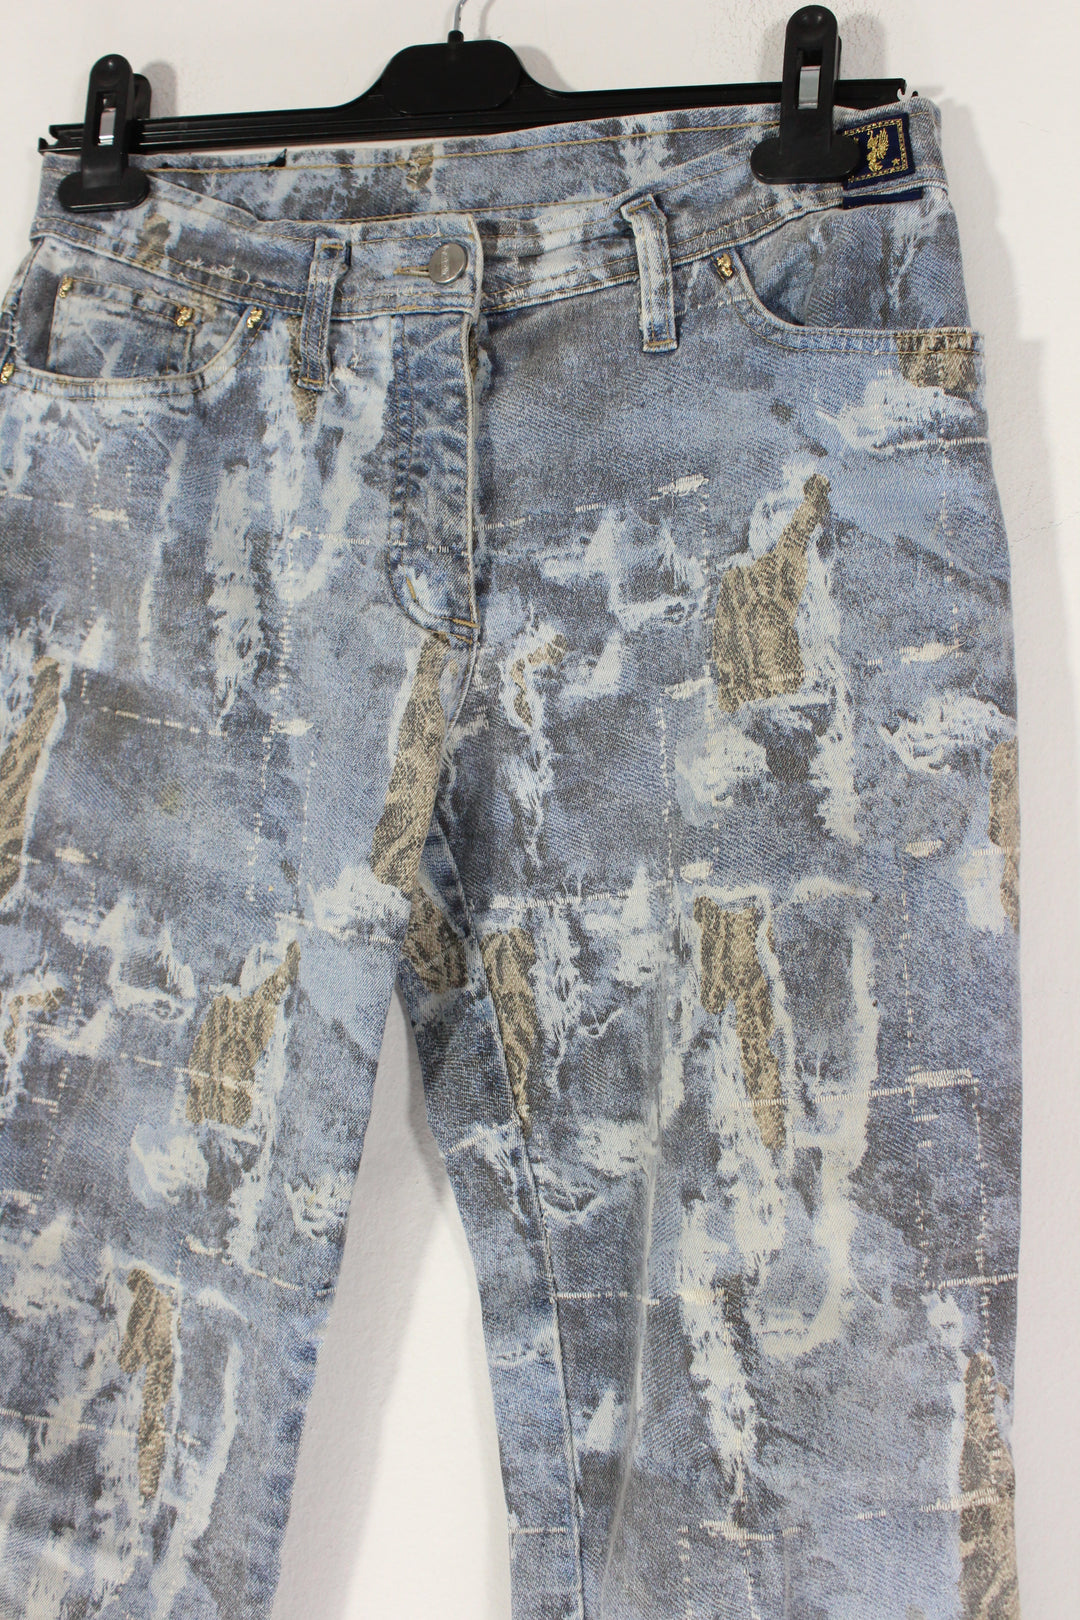 Cappopera Low Waisted Jeans in Handprinted Blue Denim Women's Small(36)